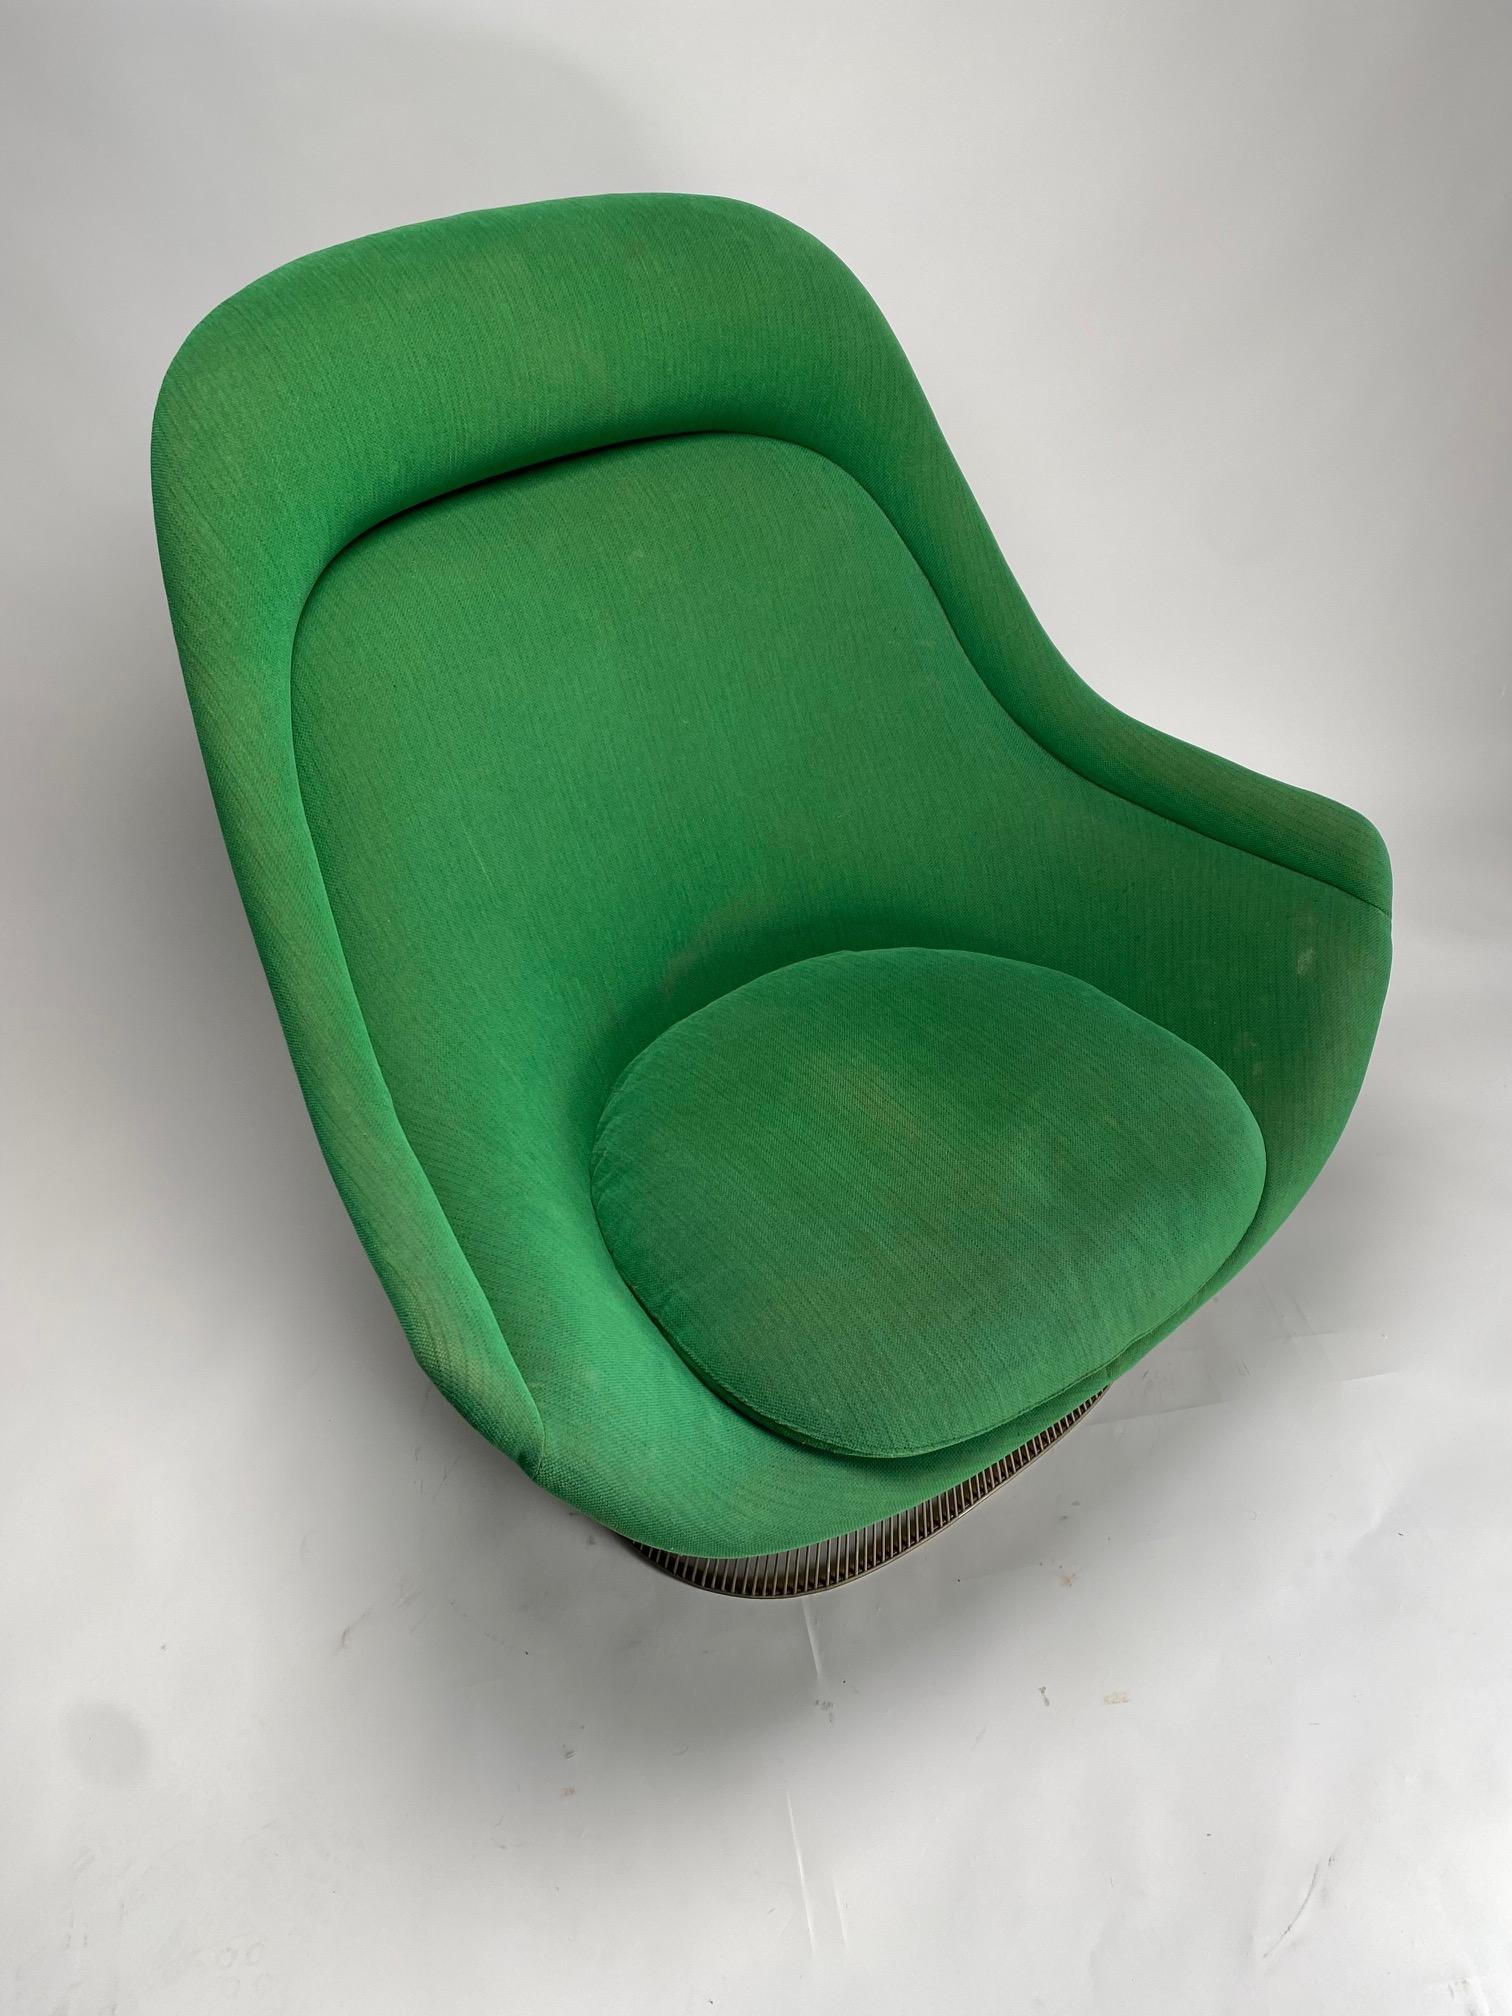 American Warren Platner Easy Lounge Chair for Knoll 1966 (Old Edition)  For Sale